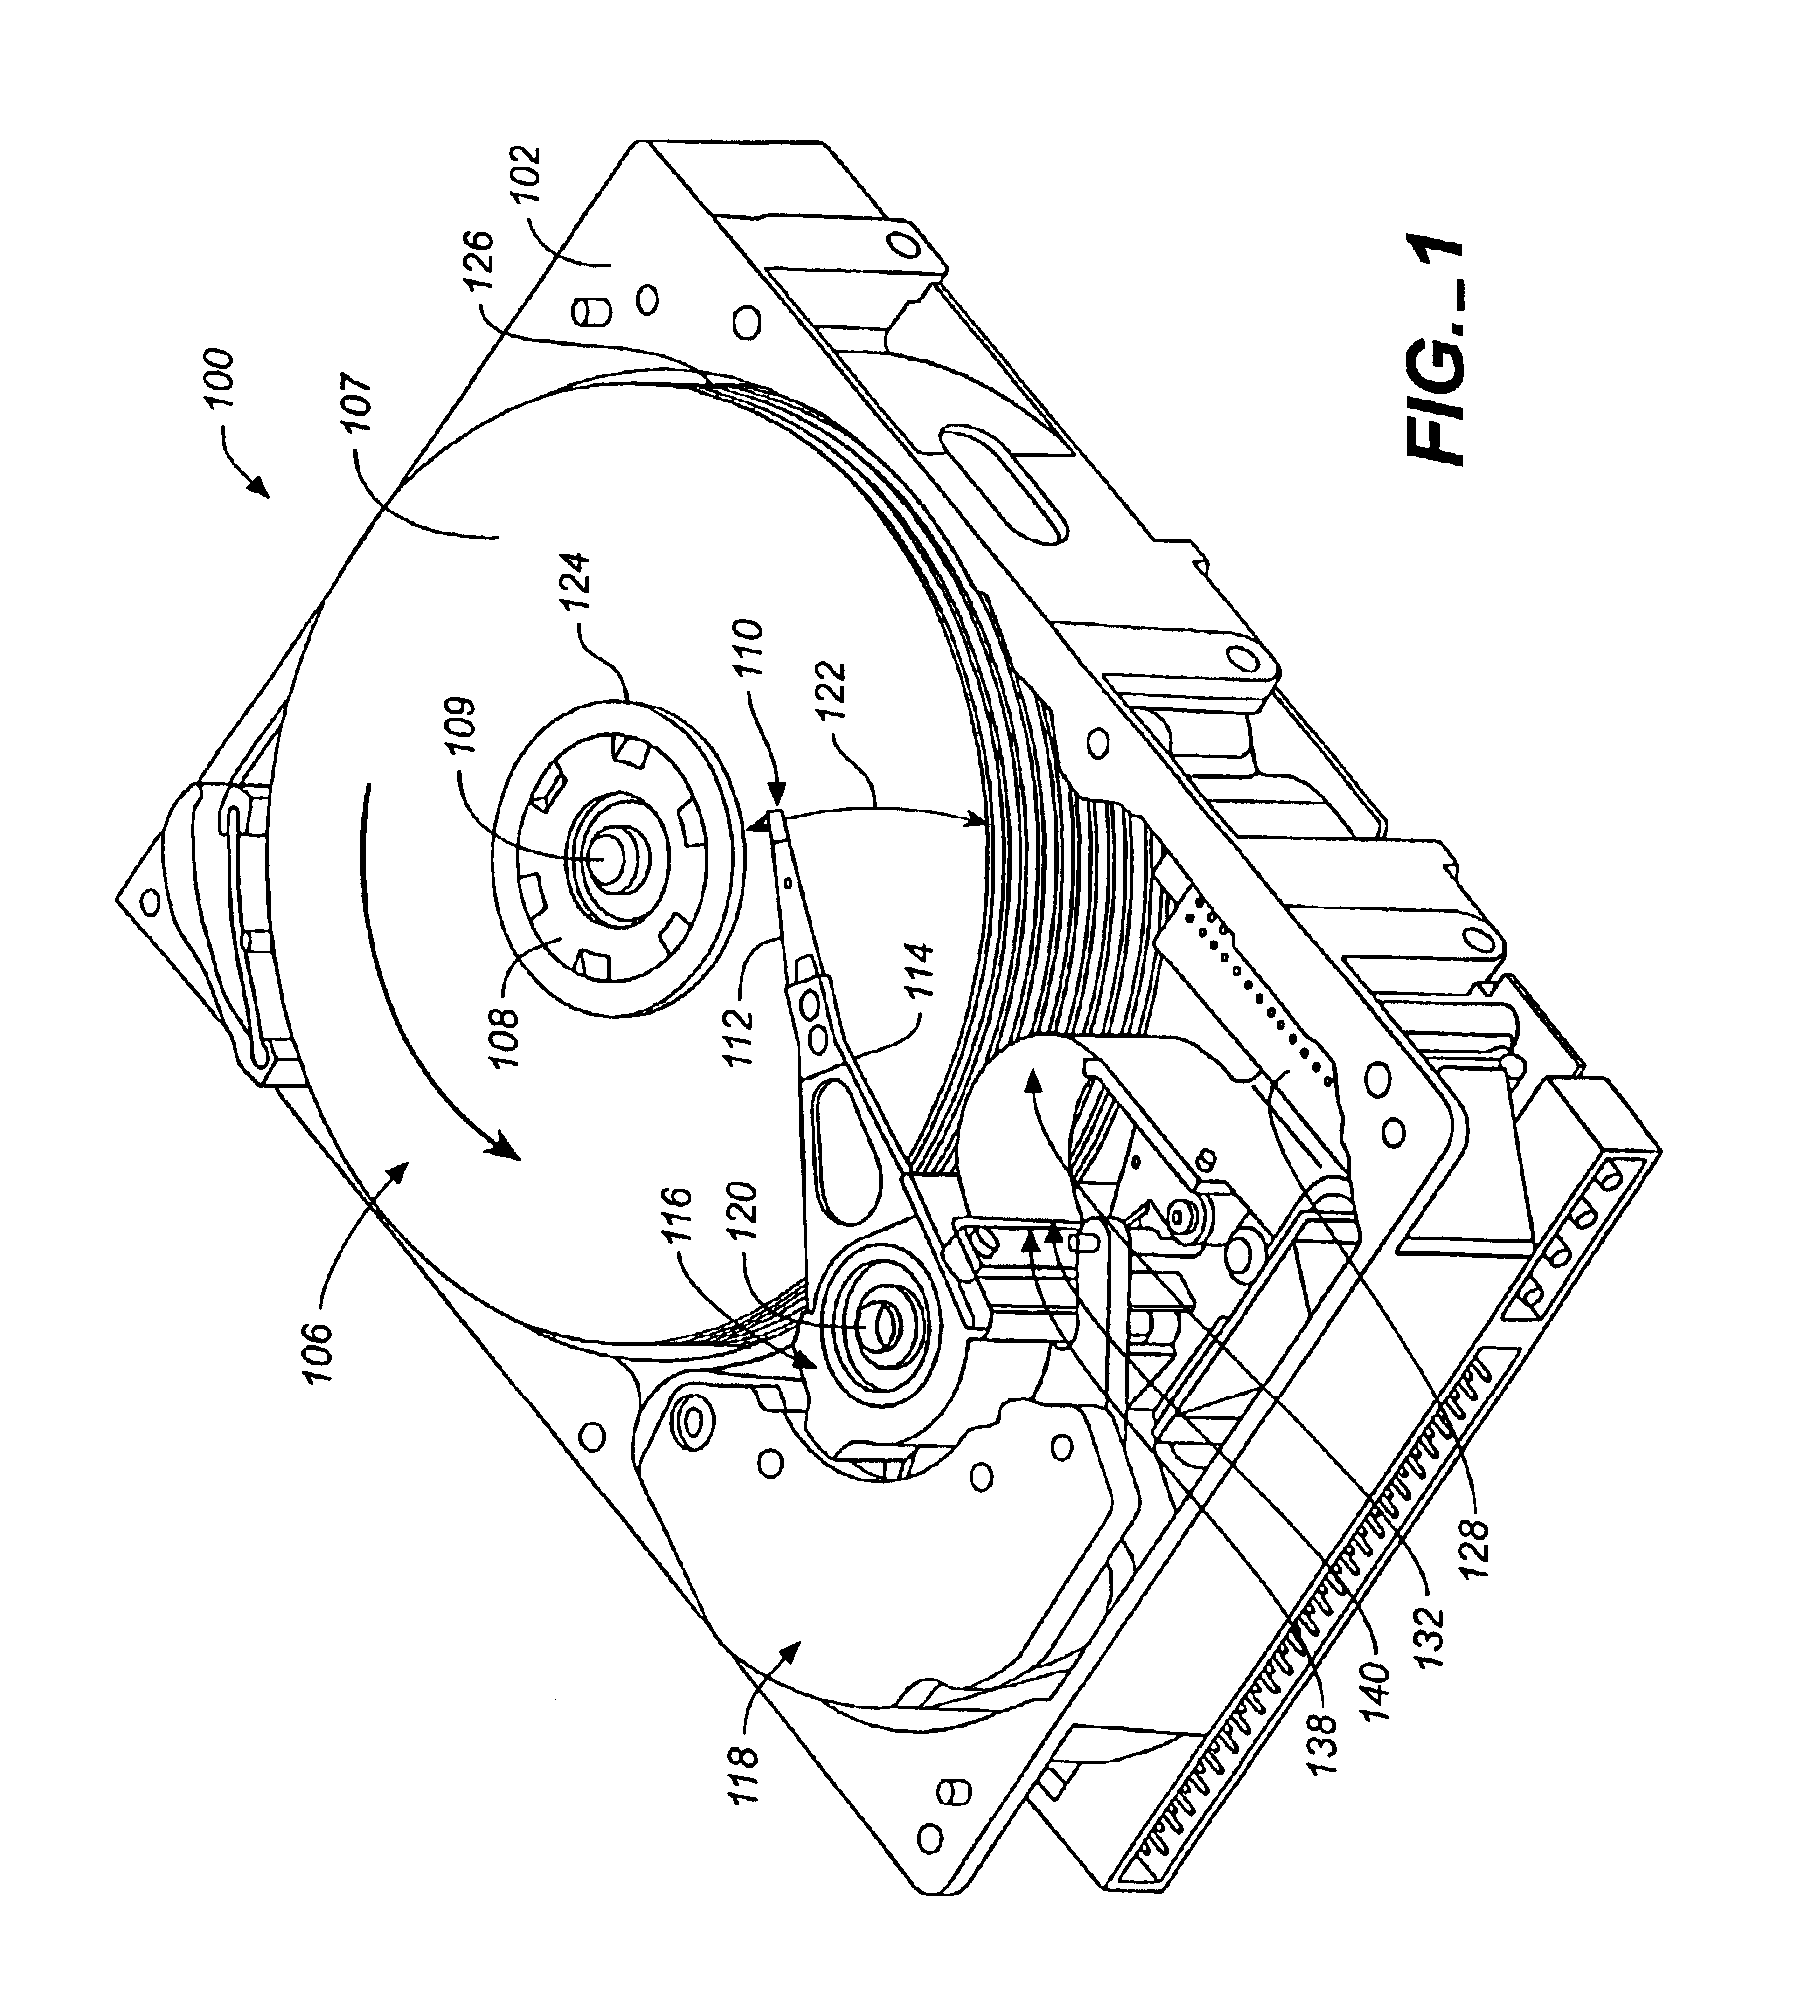 Contacting point damping method between flex circuit and pivot housing